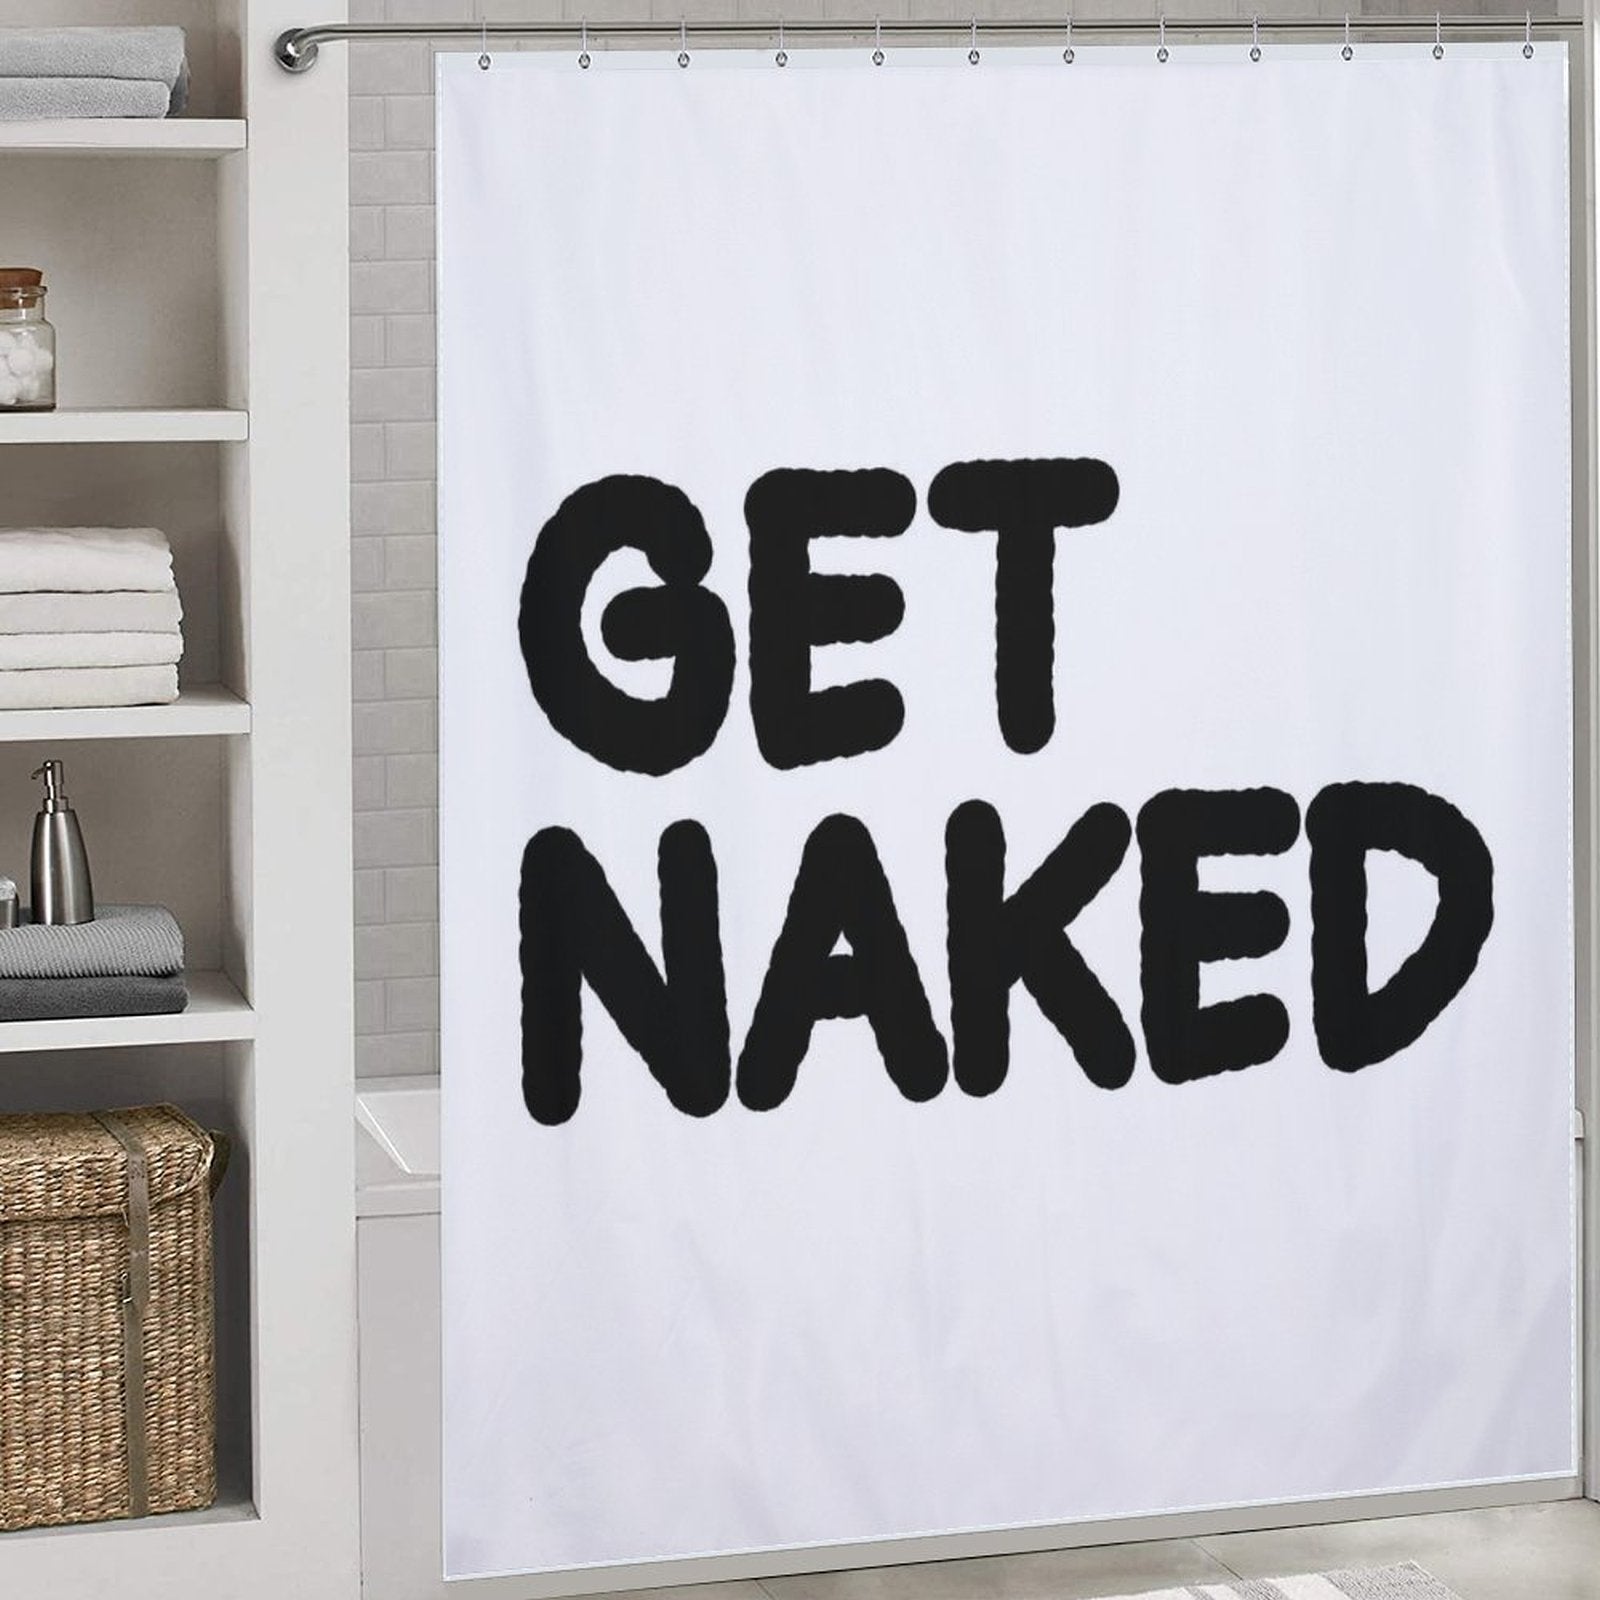 A Funny Letters Black and White Get Naked Shower Curtain-Cottoncat from Cotton Cat hangs in a bathroom, complete with shelves holding towels and a basket nearby.